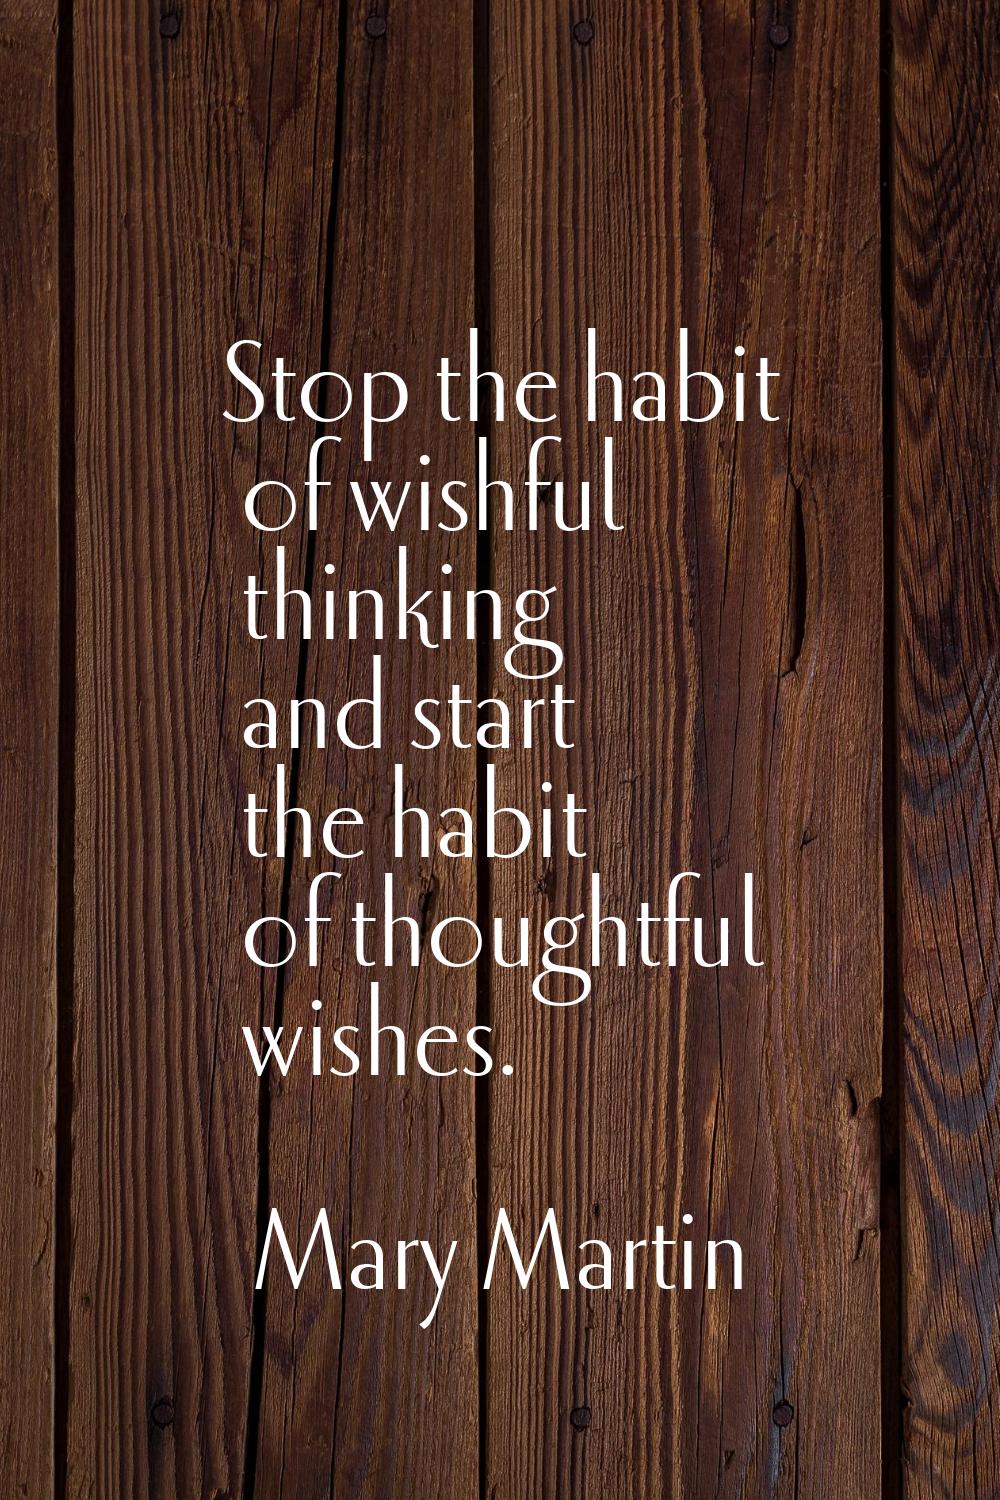 Stop the habit of wishful thinking and start the habit of thoughtful wishes.